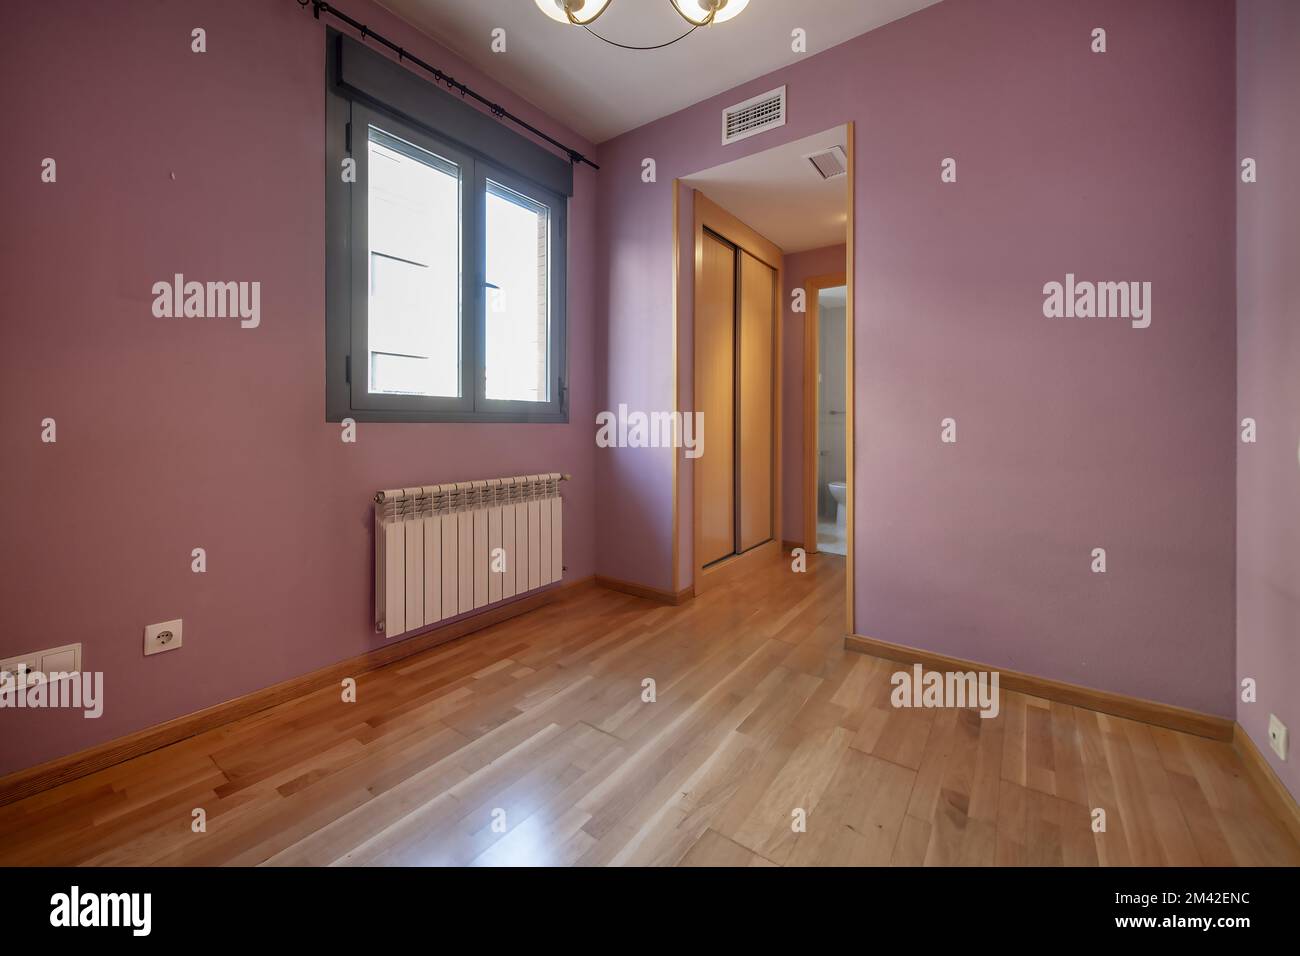 Empty bedroom with fuchsia painted walls, an antechamber with a sliding-door wardrobe, and access to an en-suite bathroom Stock Photo